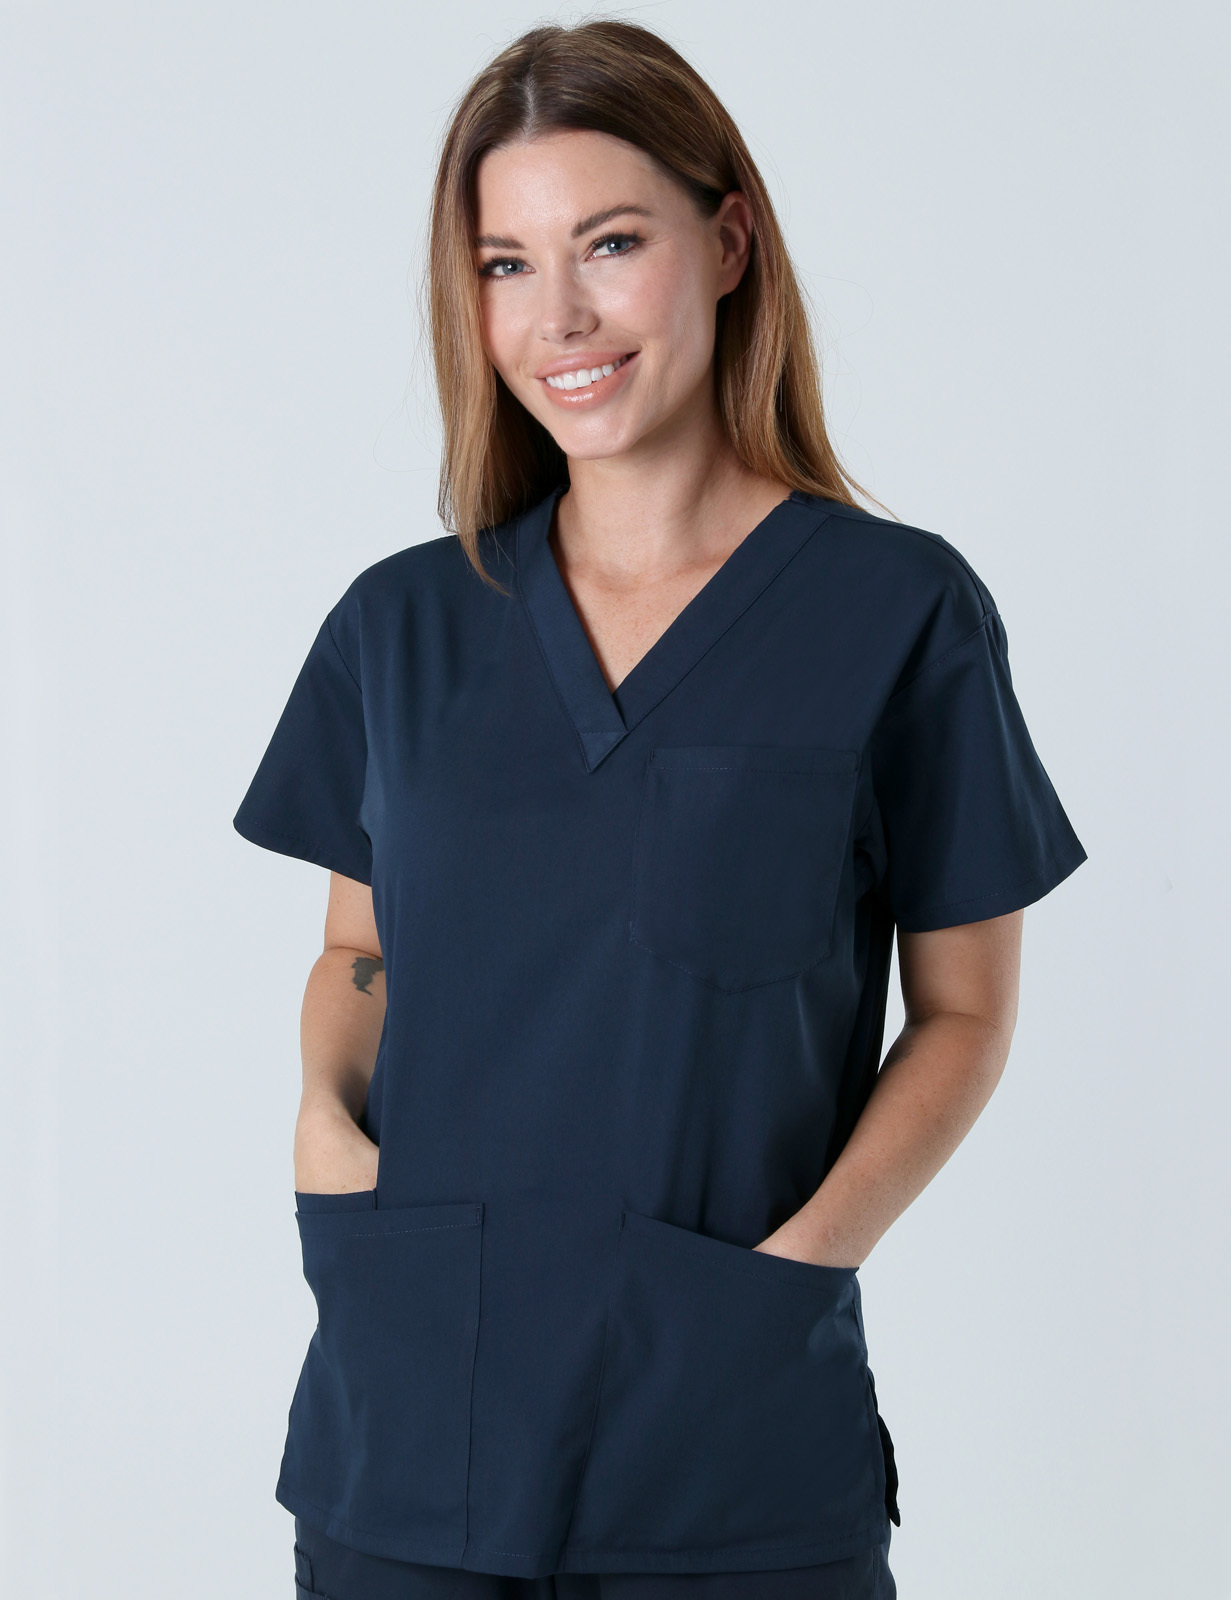 Gympie Hospital - Registered Nurse (4 Pocket Scrub Top and Cargo Pants in Navy incl Logos)